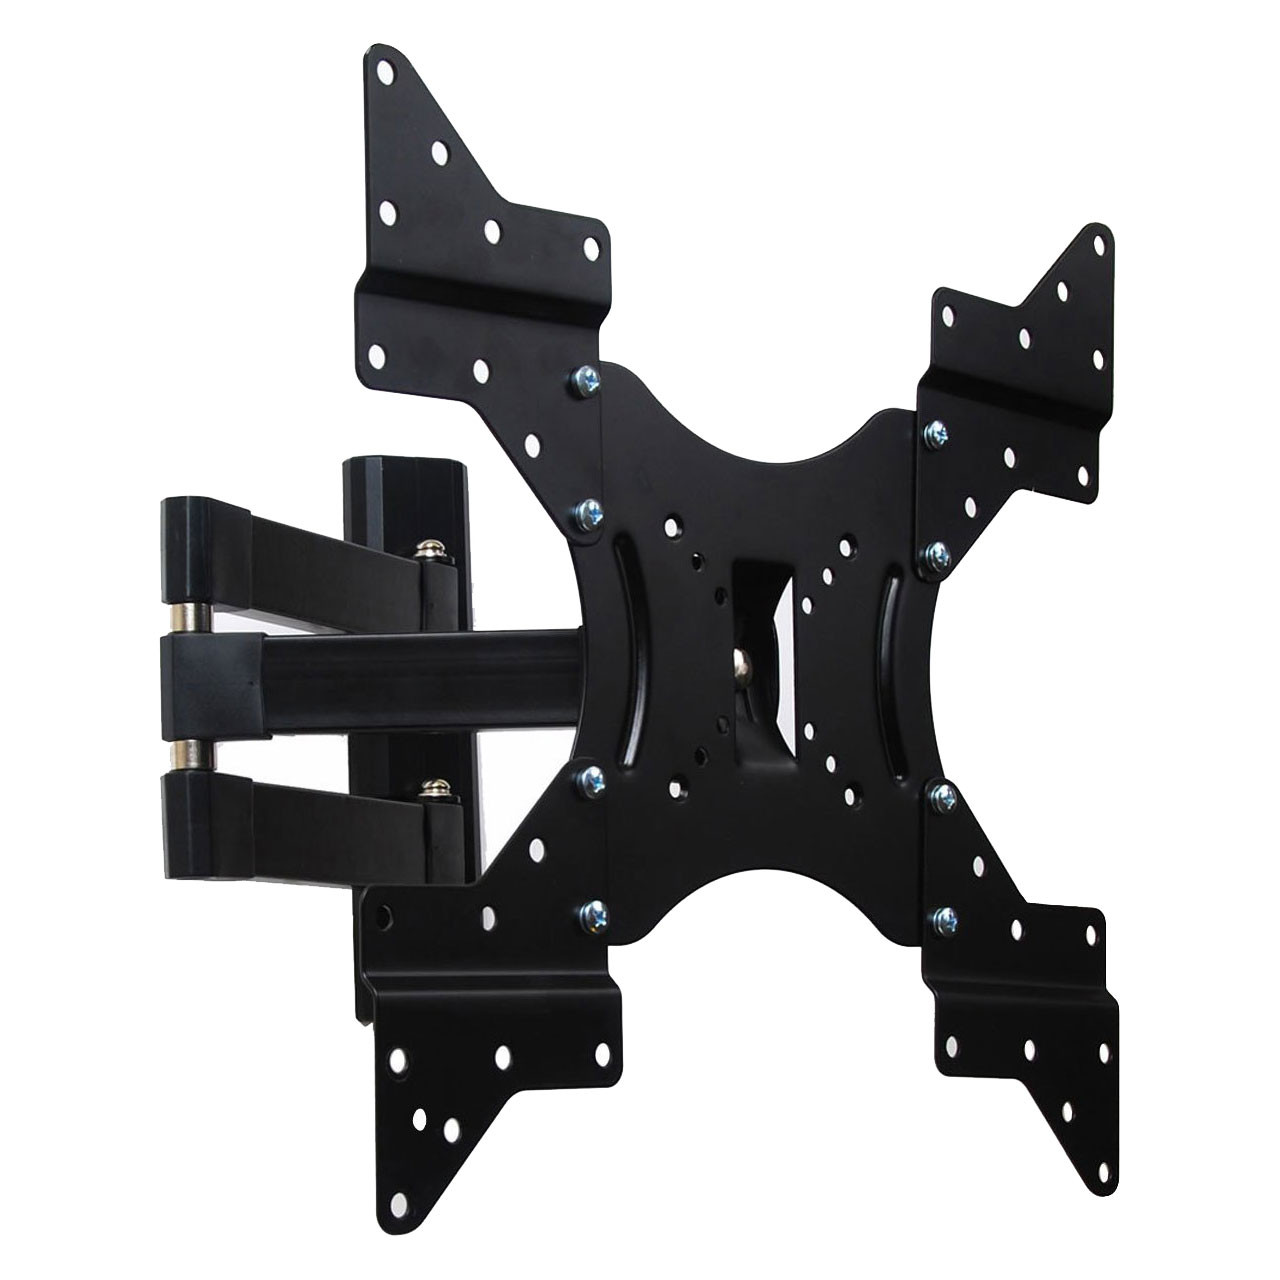 VideoSecu TV Wall Mount Monitor Bracket with Full Motion Articulating Tilt  Arm 15 Extension for most 27 30 32 35 37 39 42 LCD LED TVs, some  models up to 47 with VESA 200x200 ML14B WS2 